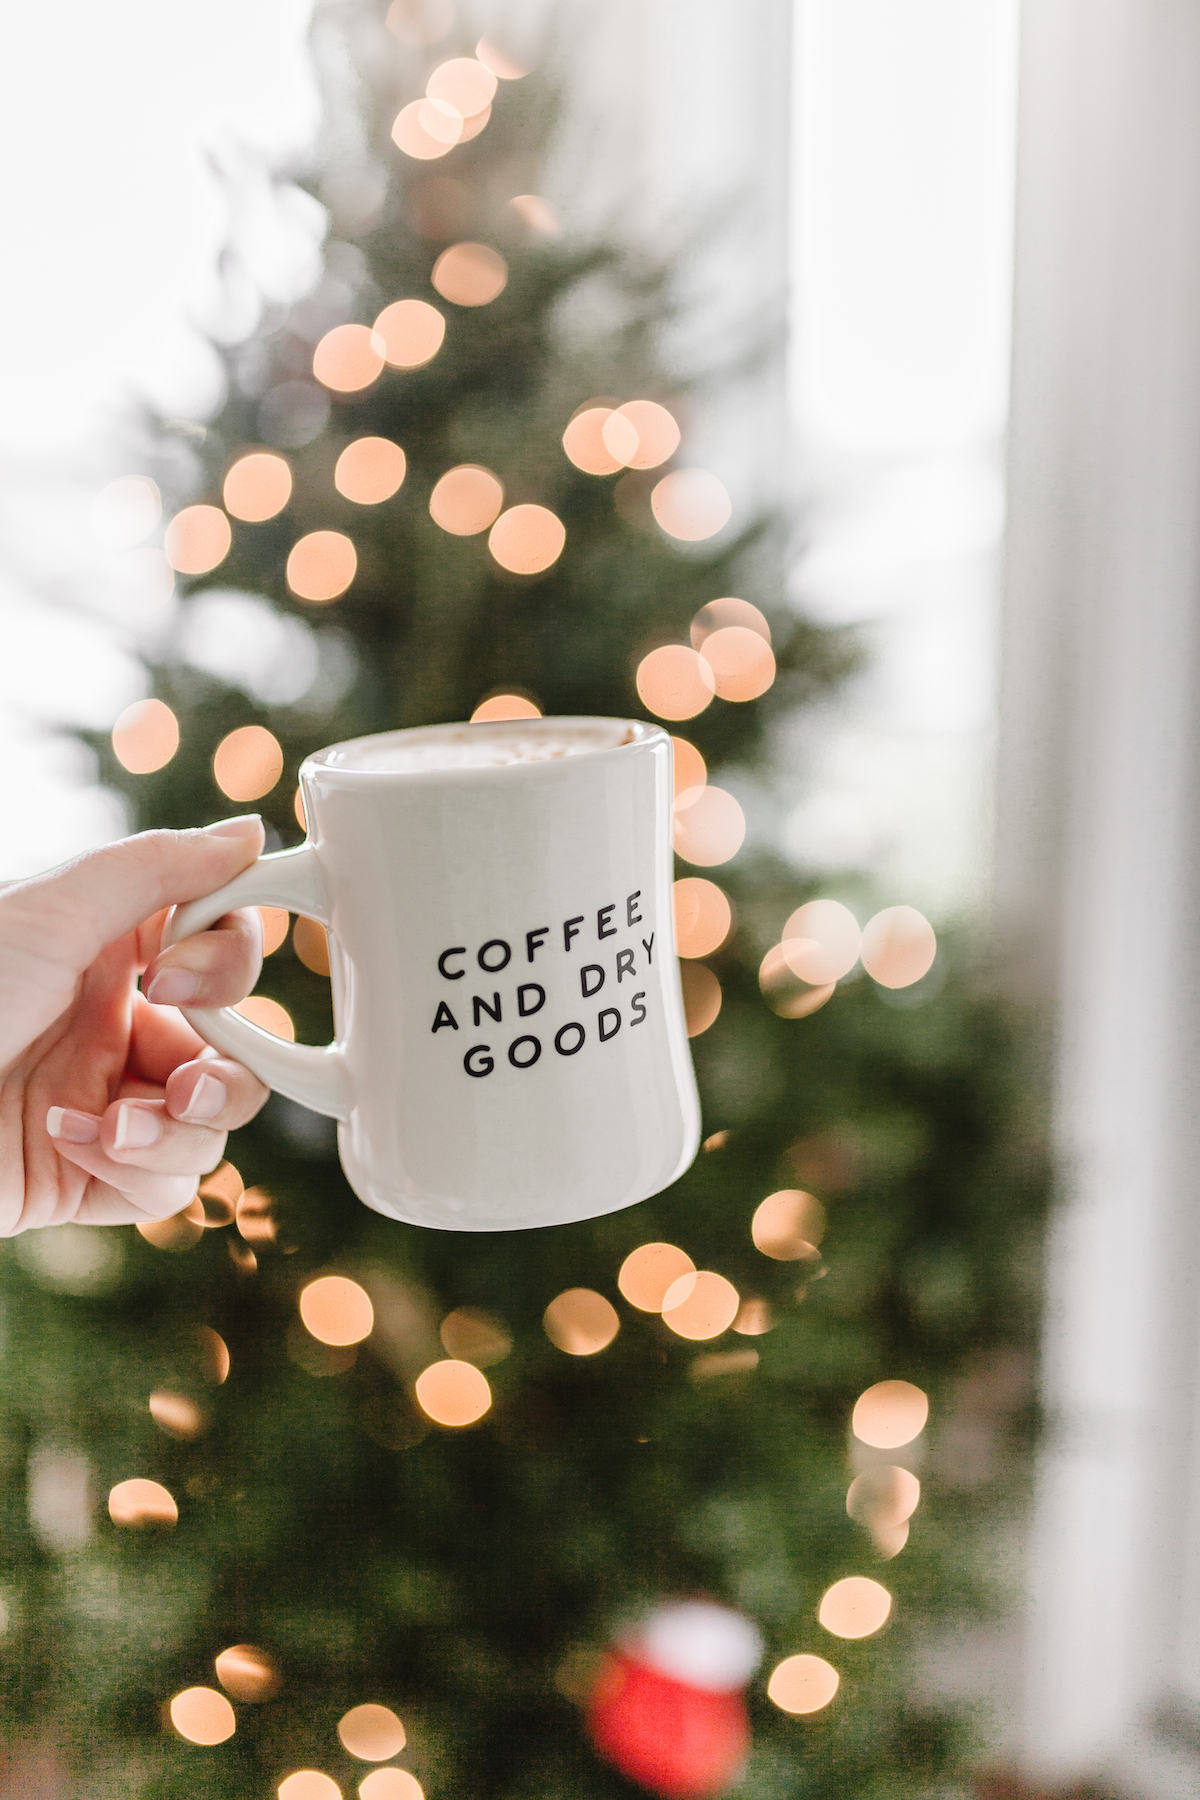 An easy, no-fuss Gingerbread Latte Recipe for those times when you simply want to enjoy a fancy homemade latte recipe | bygabriella.co @gabivalladares